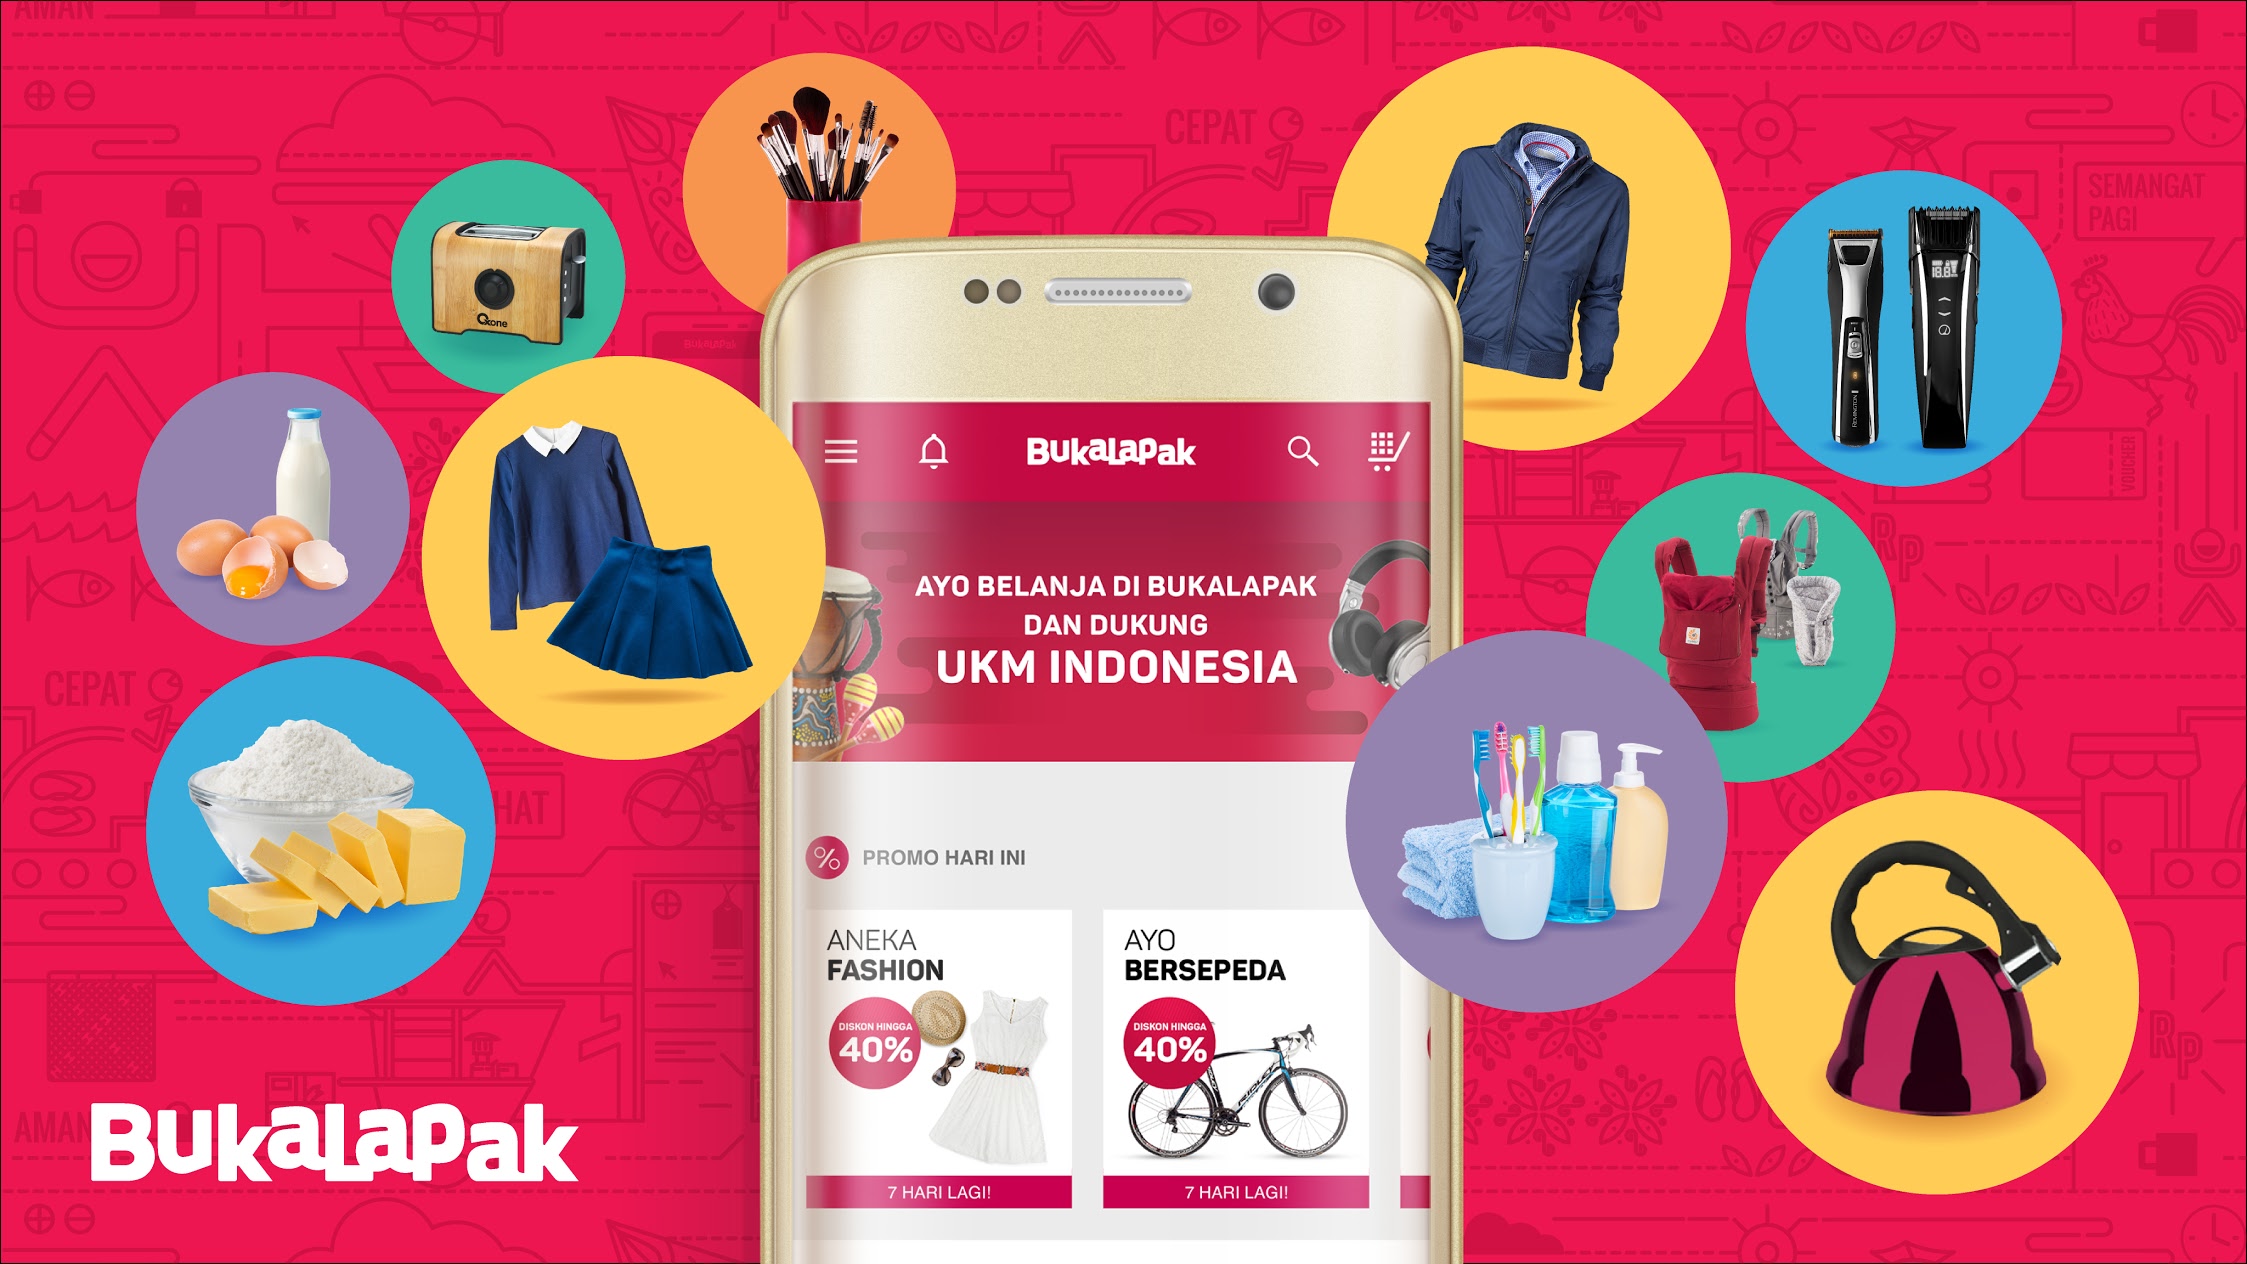 The 9-year journey of Bukalapak: Growing beyond e-commerce